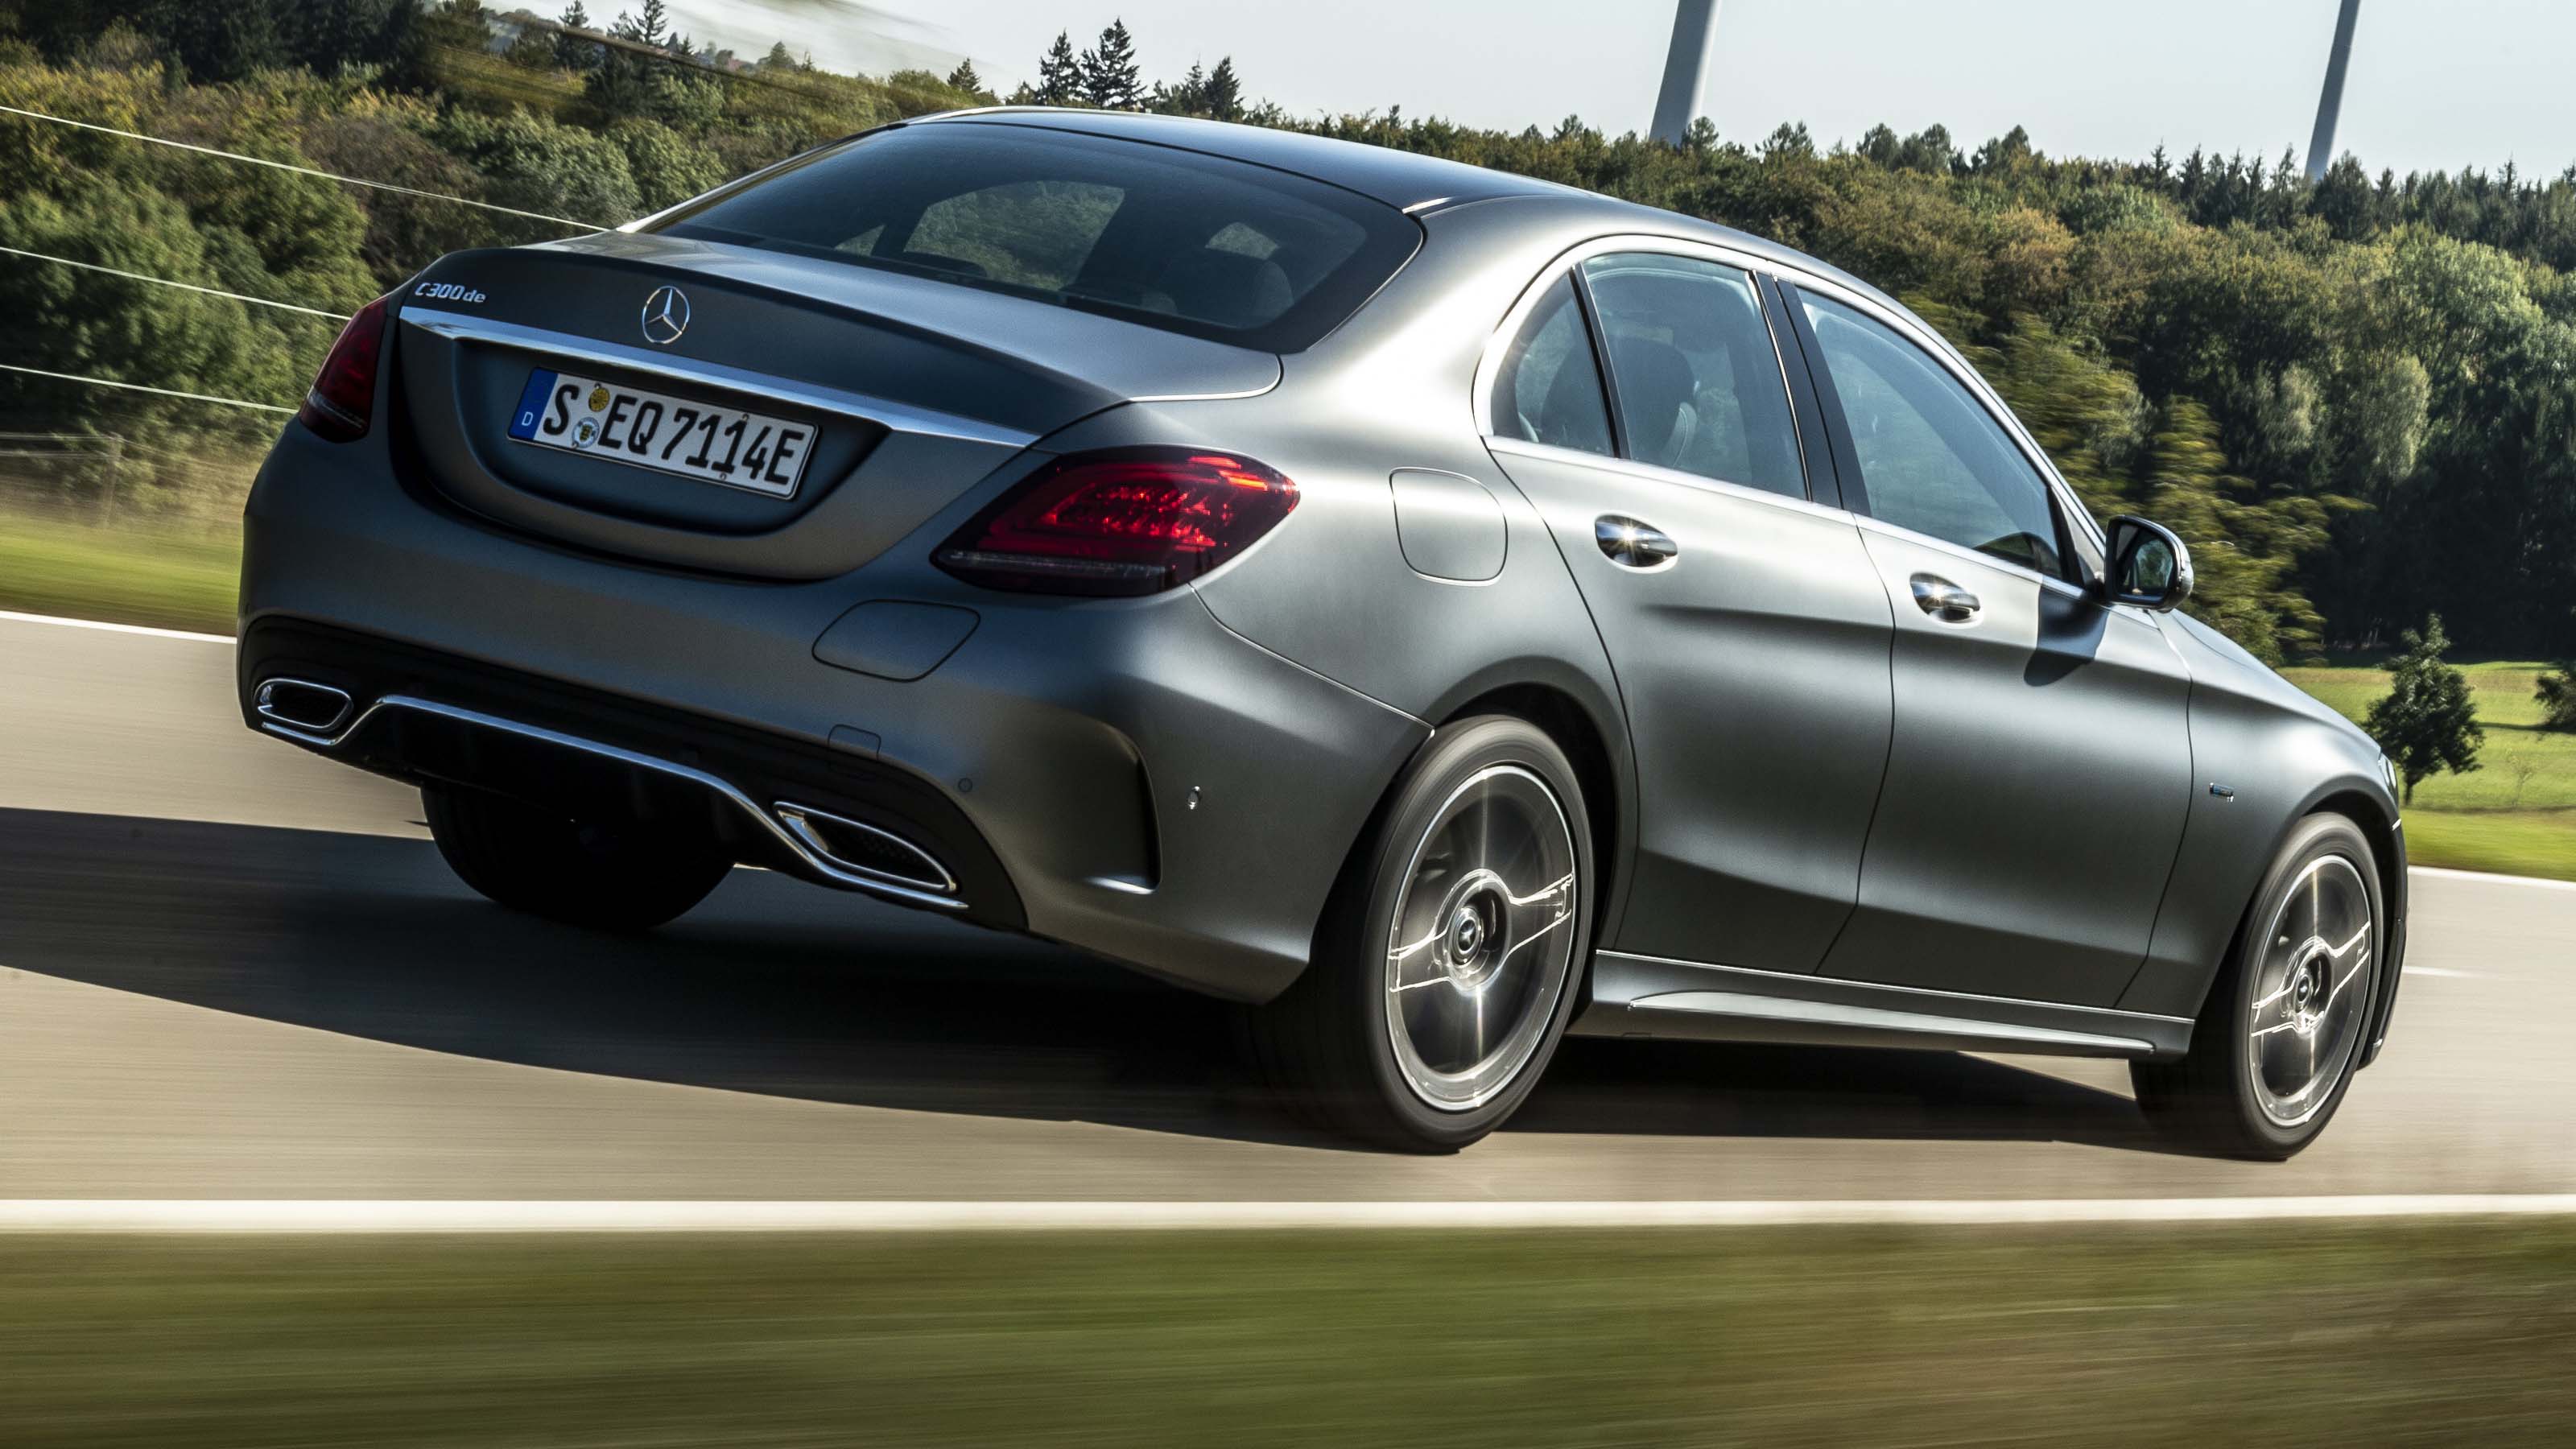 Mercedes Cclass hybrid saloon running costs DrivingElectric